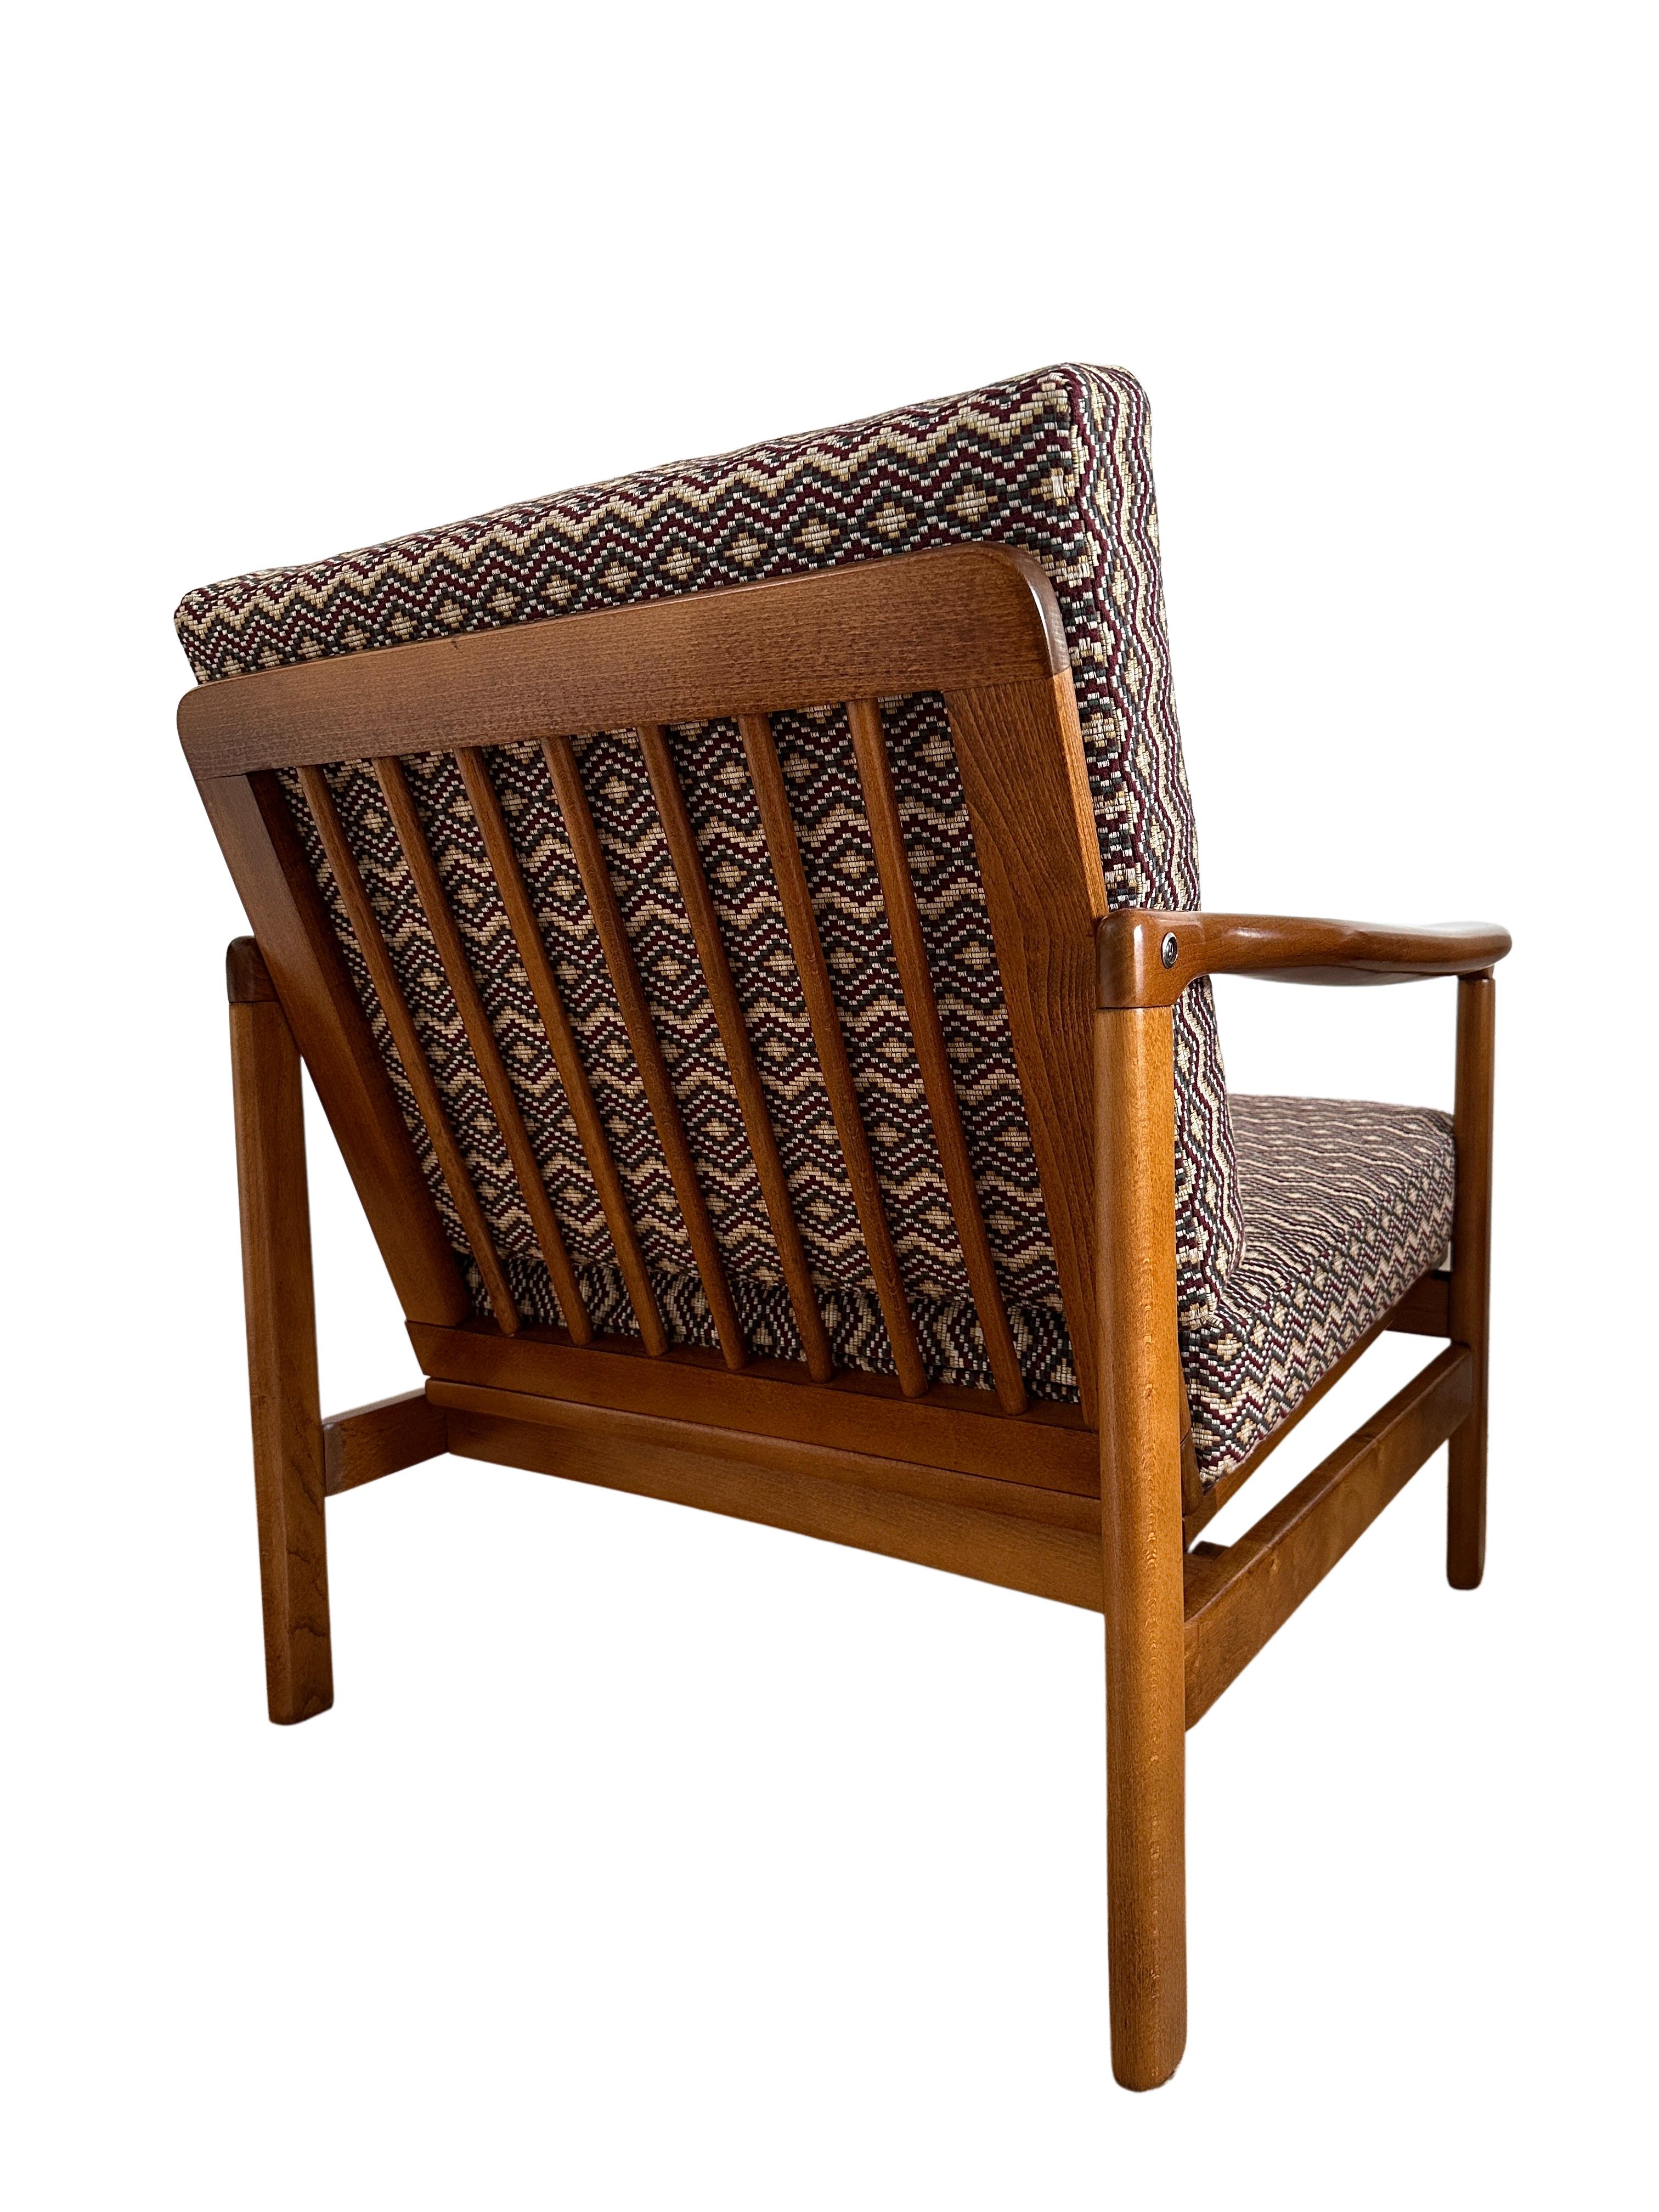 Midcentury Armchair, in Geometric and Ethnic Fabric, Europe, 1960s For Sale 1